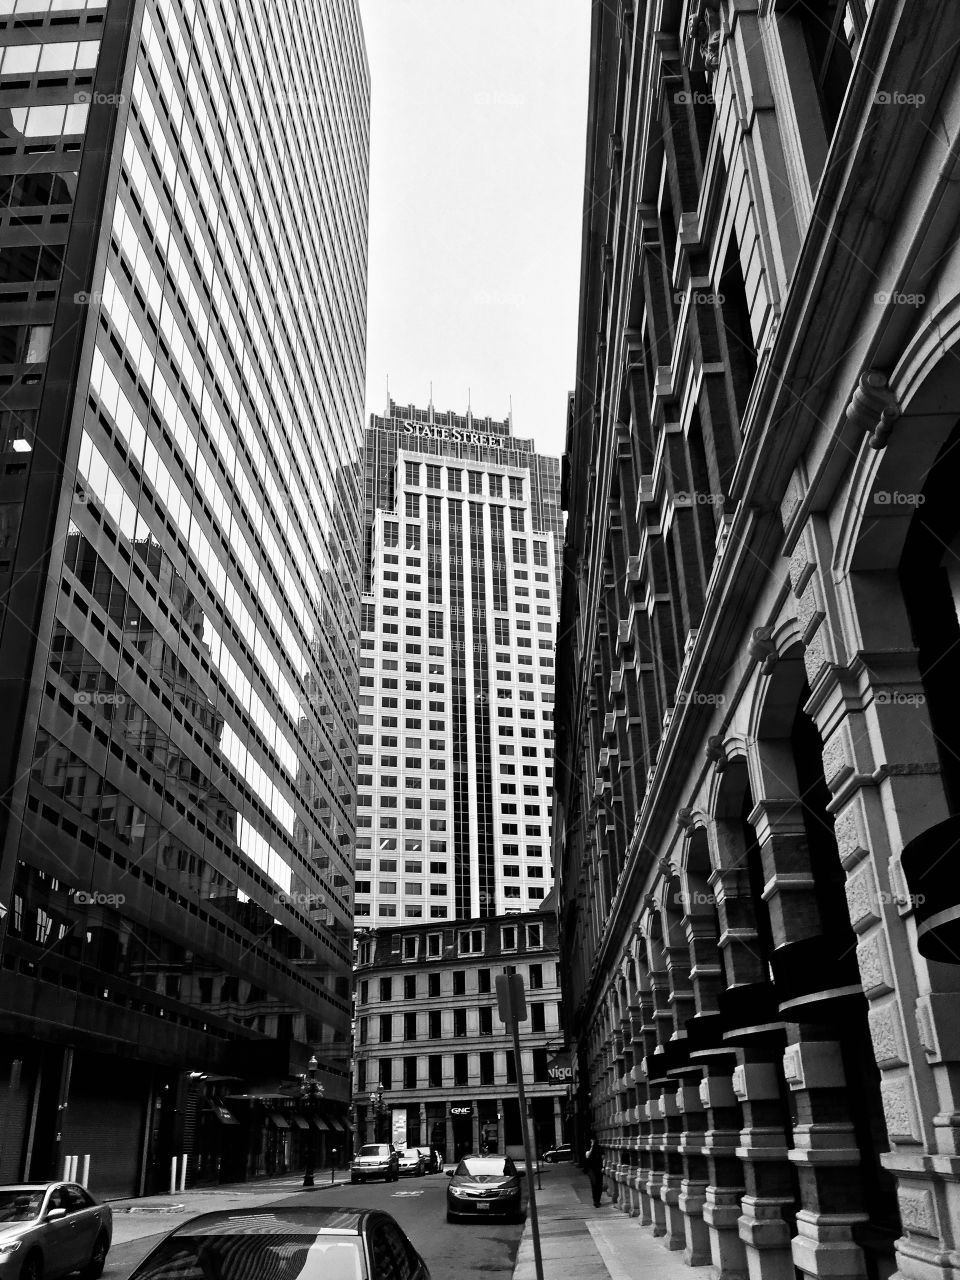 A picture of the giant office buildings in downtown Boston 